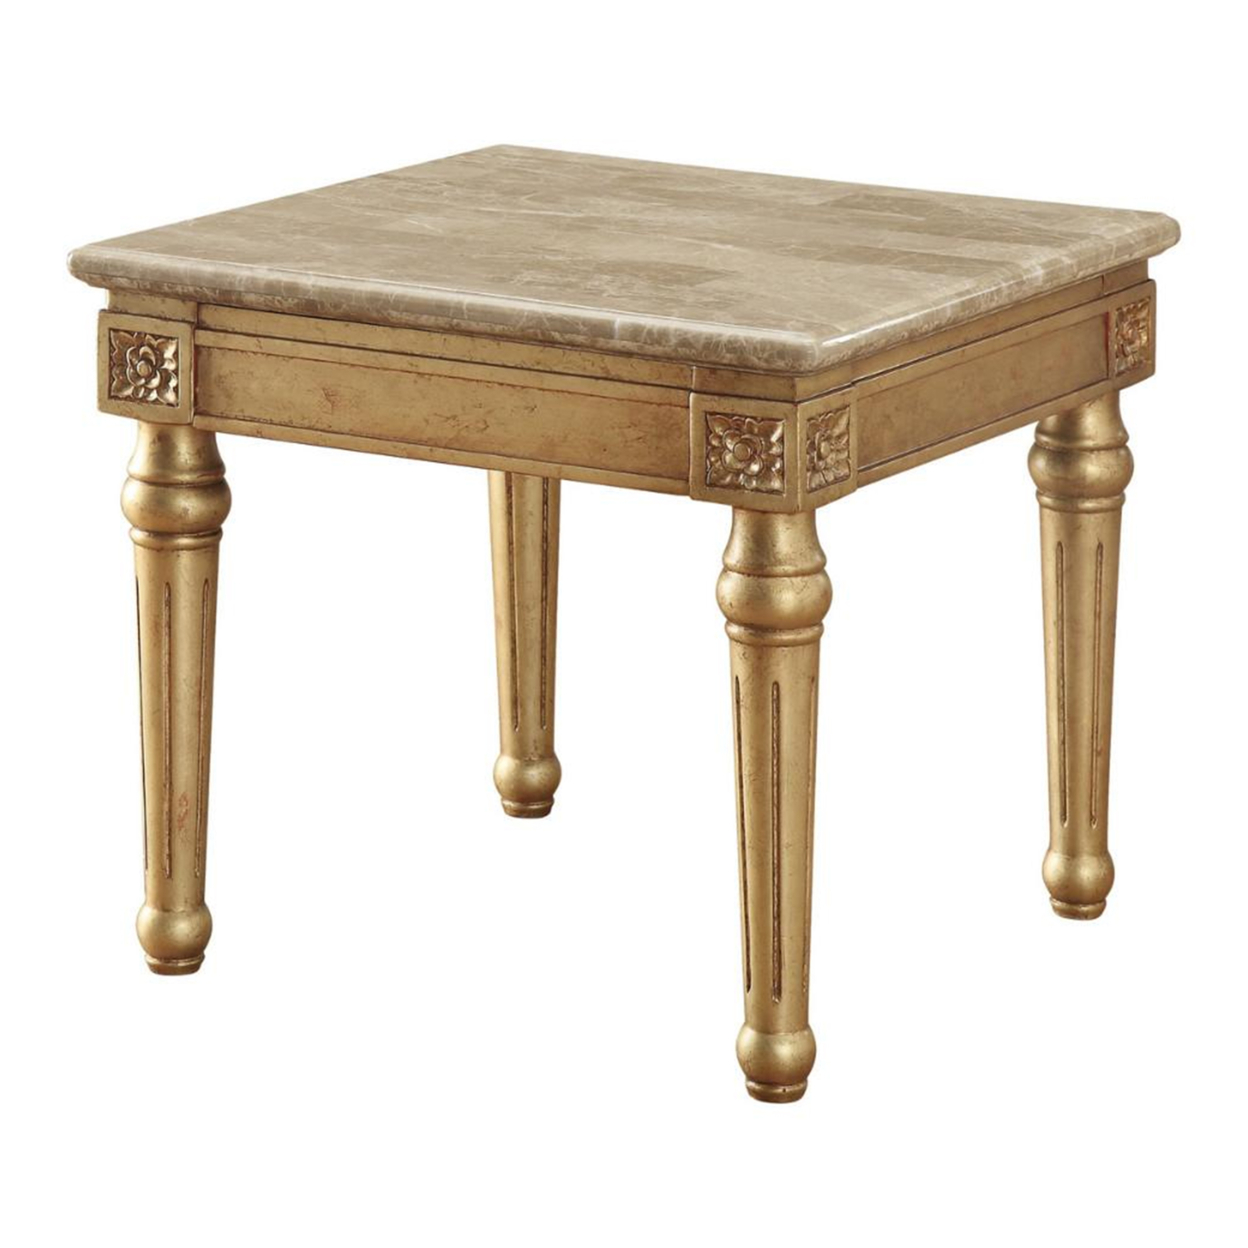 Marble Top End Table With Fluted Detail Wooden Turned Legs, Gold- Saltoro Sherpi